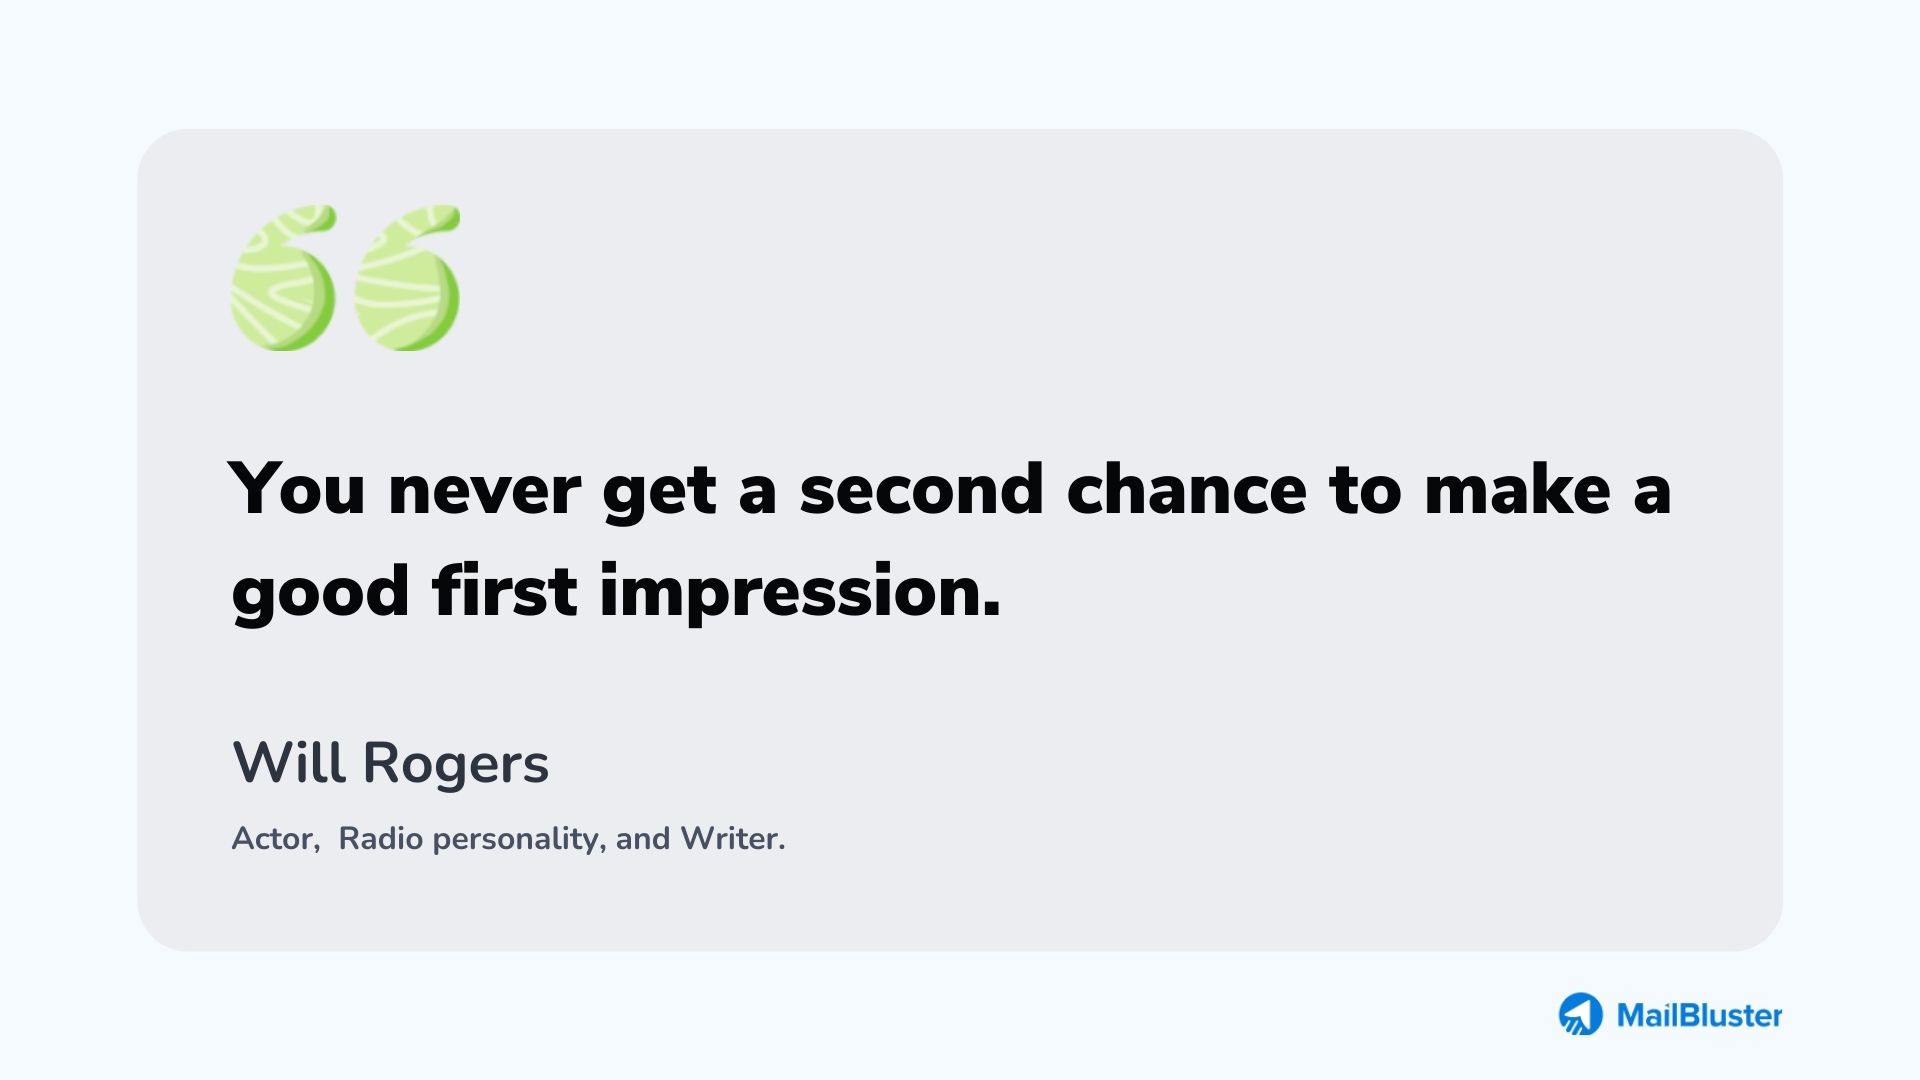 You never get a second chance to make a good first impression - Will Rogers